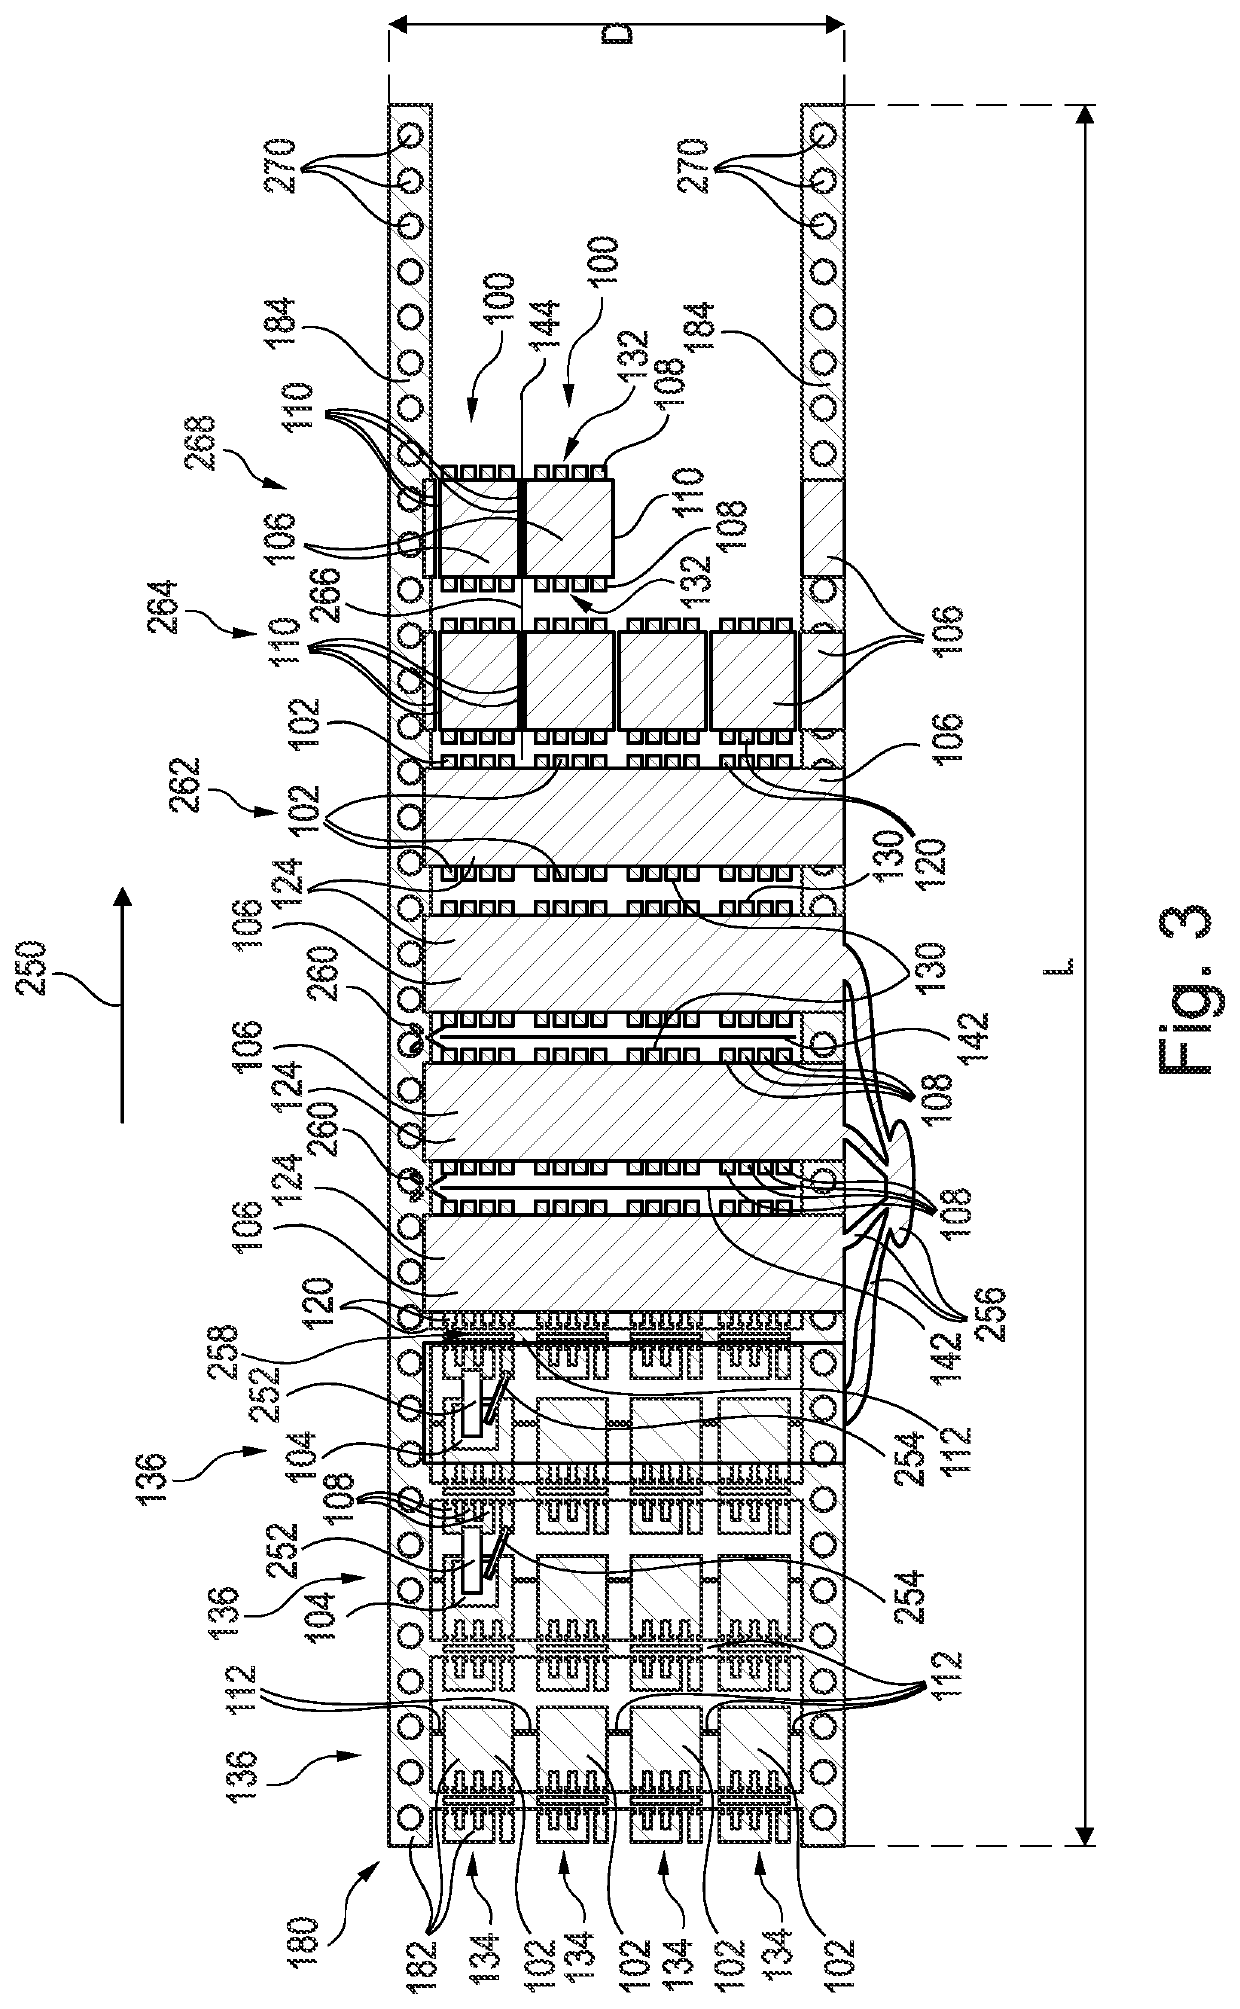 Leadframe, Encapsulated Package with Punched Lead and Sawn Side Flanks, and Corresponding Manufacturing Method